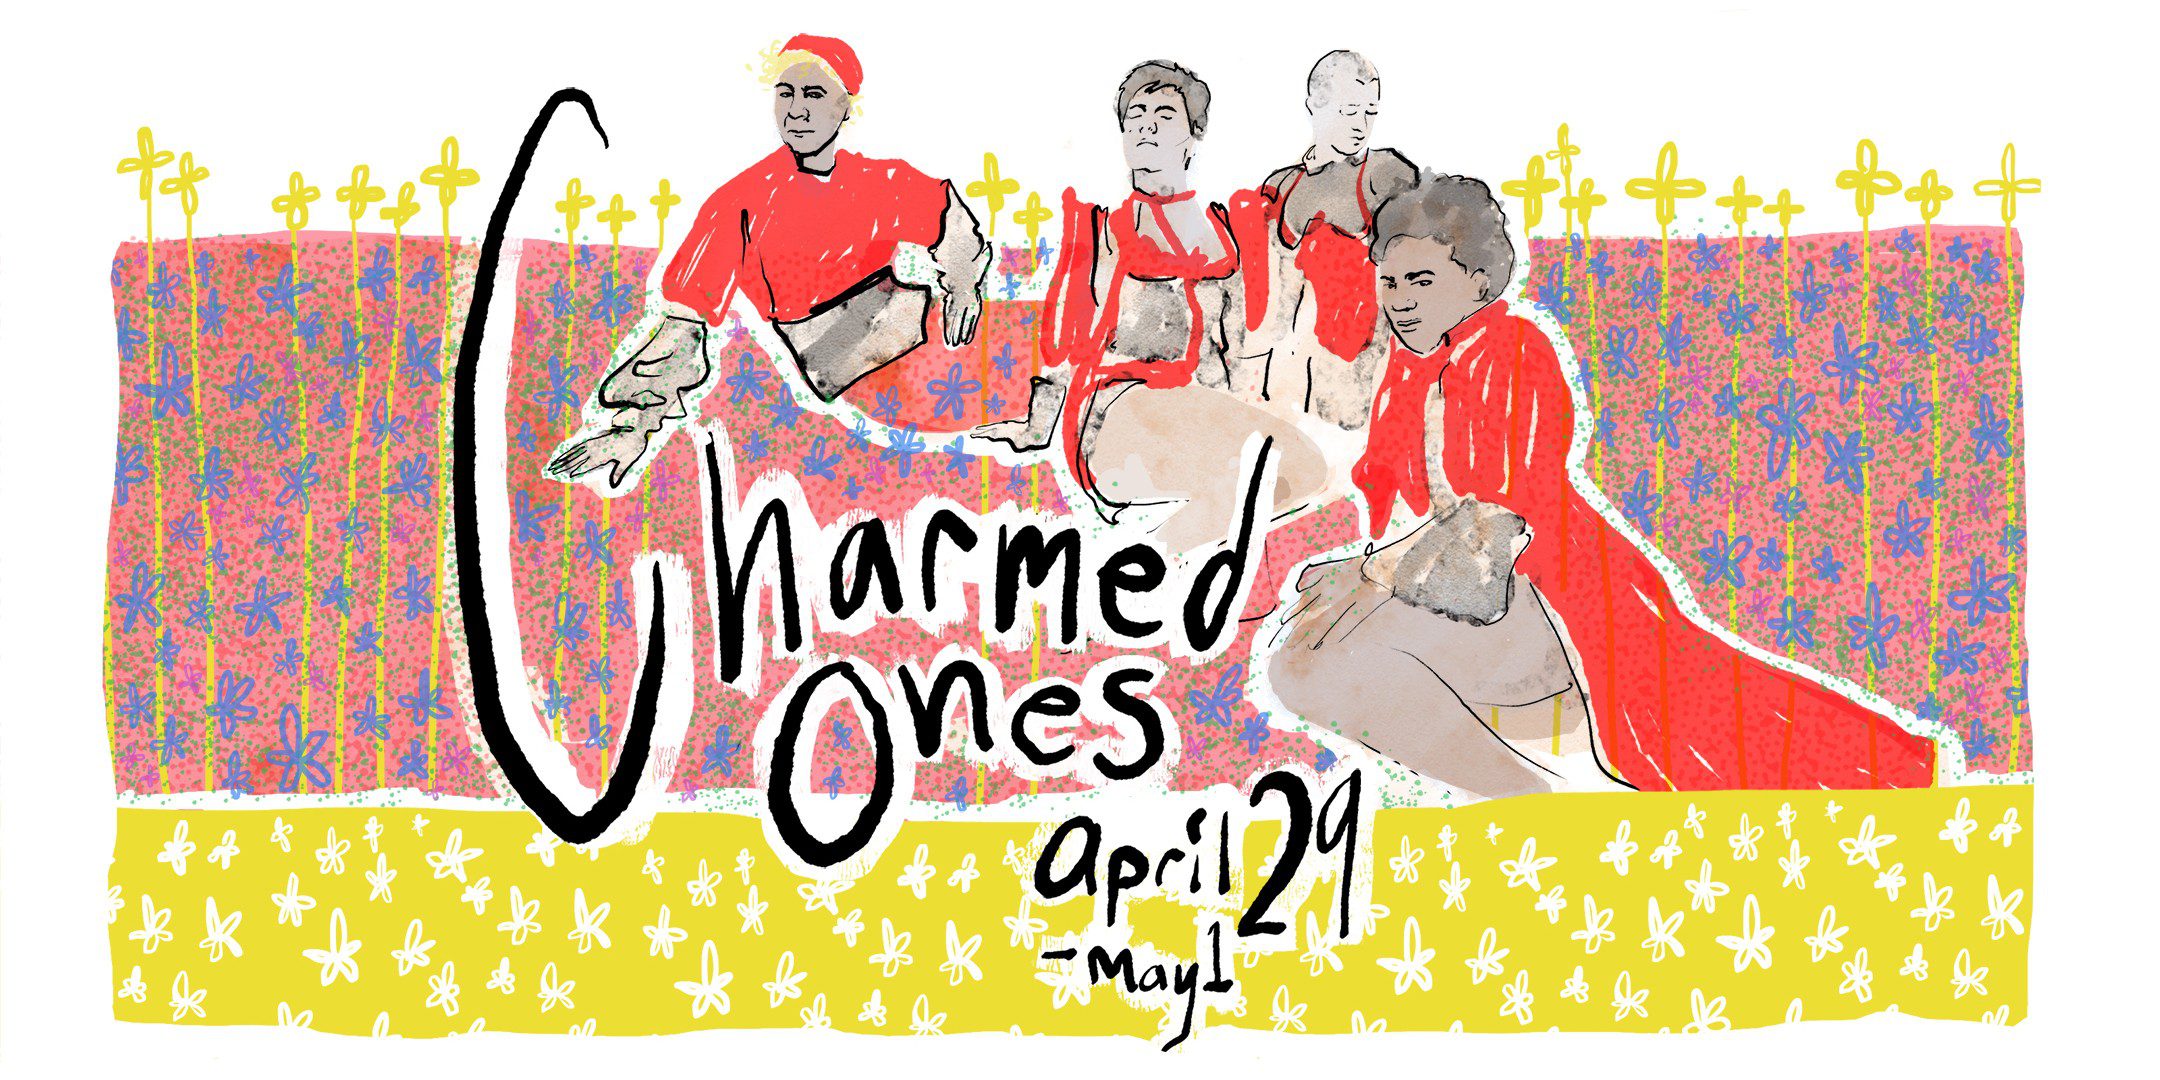 Charmed Ones, April 29 through May 1 2021. Four illustrated versions of the Charmed Ones Ensemble lounge in a field of flowers.